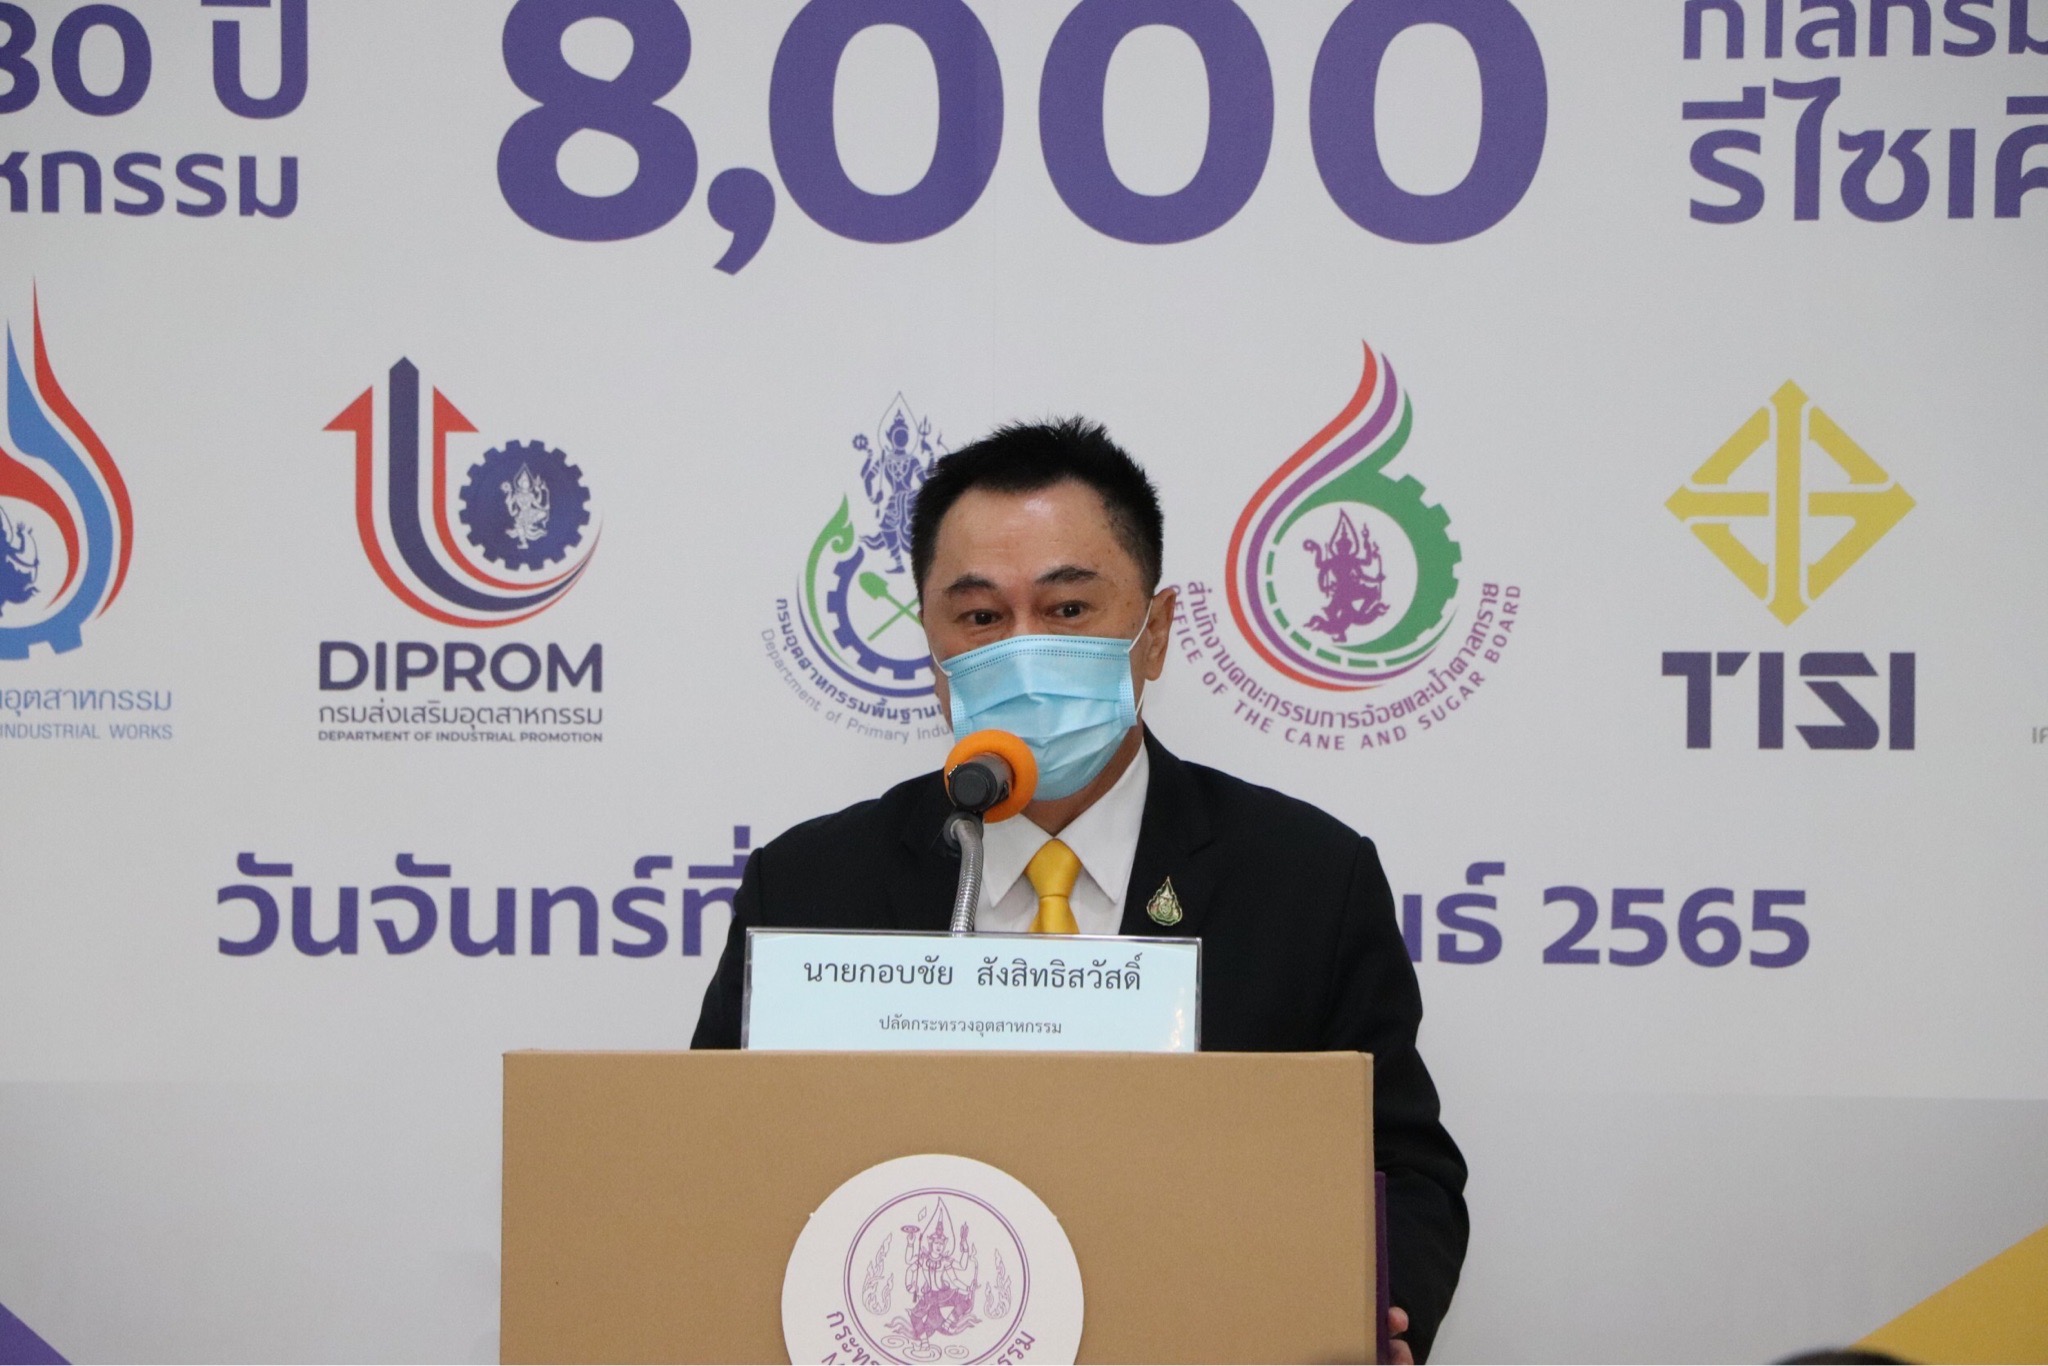 Ministry of Industry and 7 Affiliated Agencies, Join with SCGP to Launch the Project, "the 80th Year of the Ministry of Industry, 8,000 Kilograms, Recycle to Society" and Pilot the Government Sector t